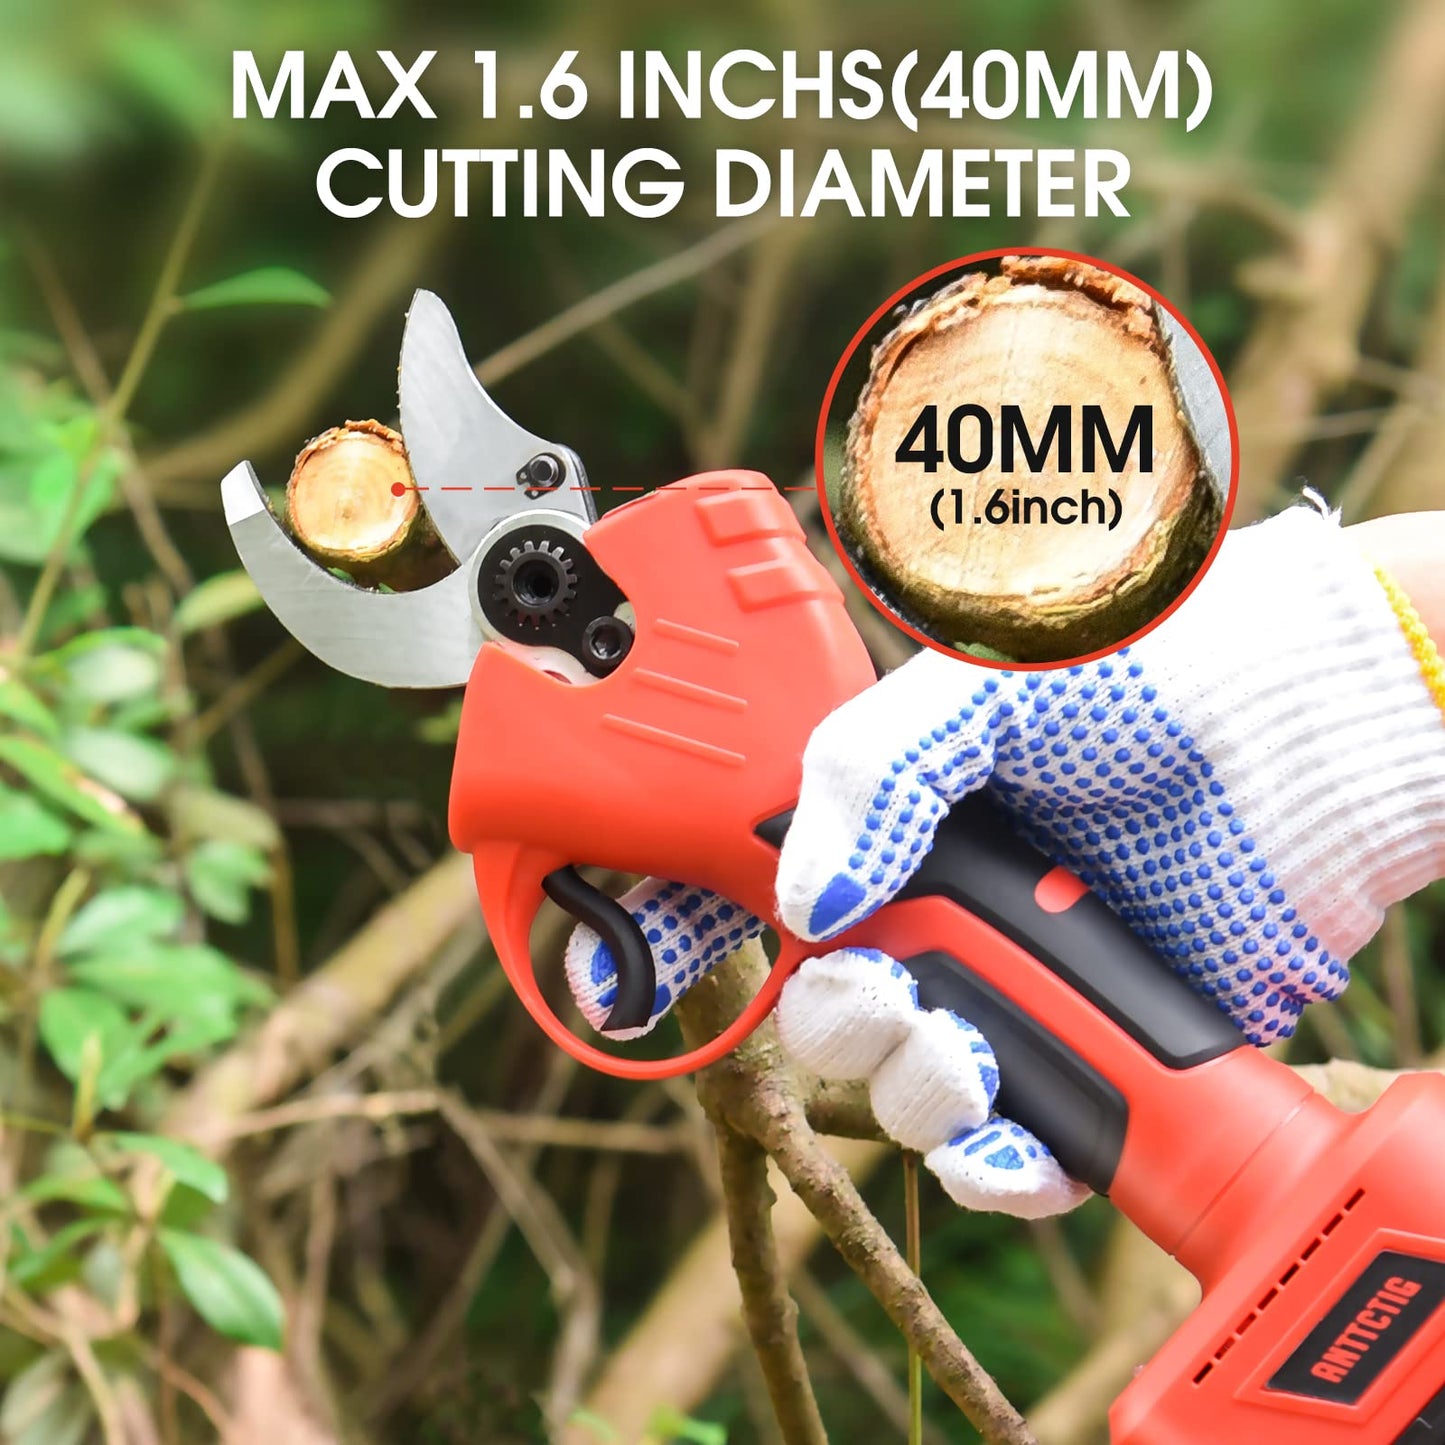 Anttctig Electric Pruning Shears, 40mm 1.6" Cutting Diameter Cordless Power Pruner for Gardening with 2Pcs 2000mAh Rechargeable Batteries & Replacement Blades Set, Tree Pruner Branch Cutter